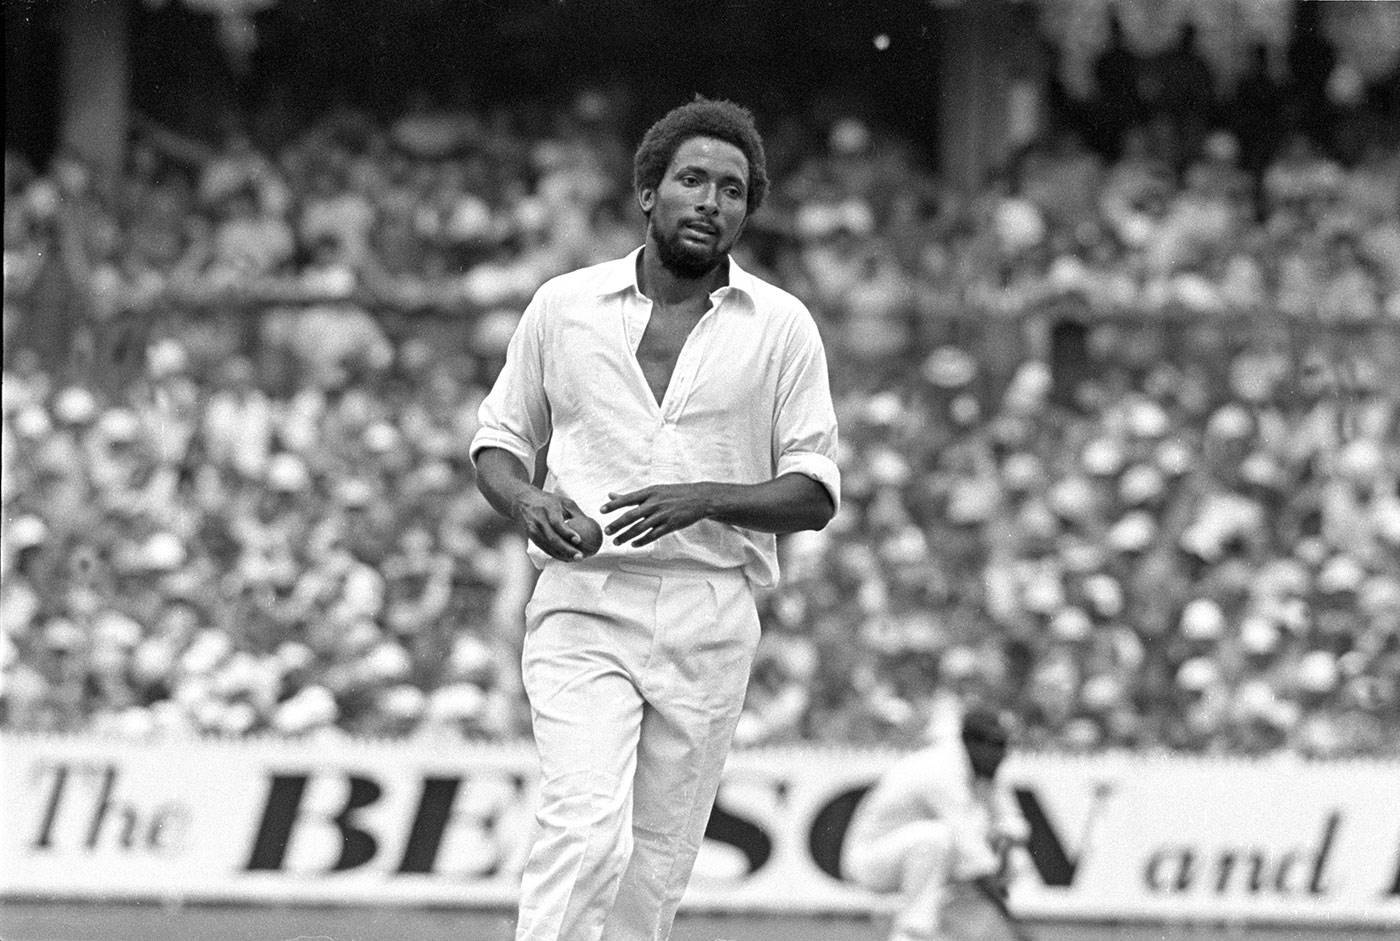 Andy Roberts criticises CWI for scheduling too many India games in Trinidad